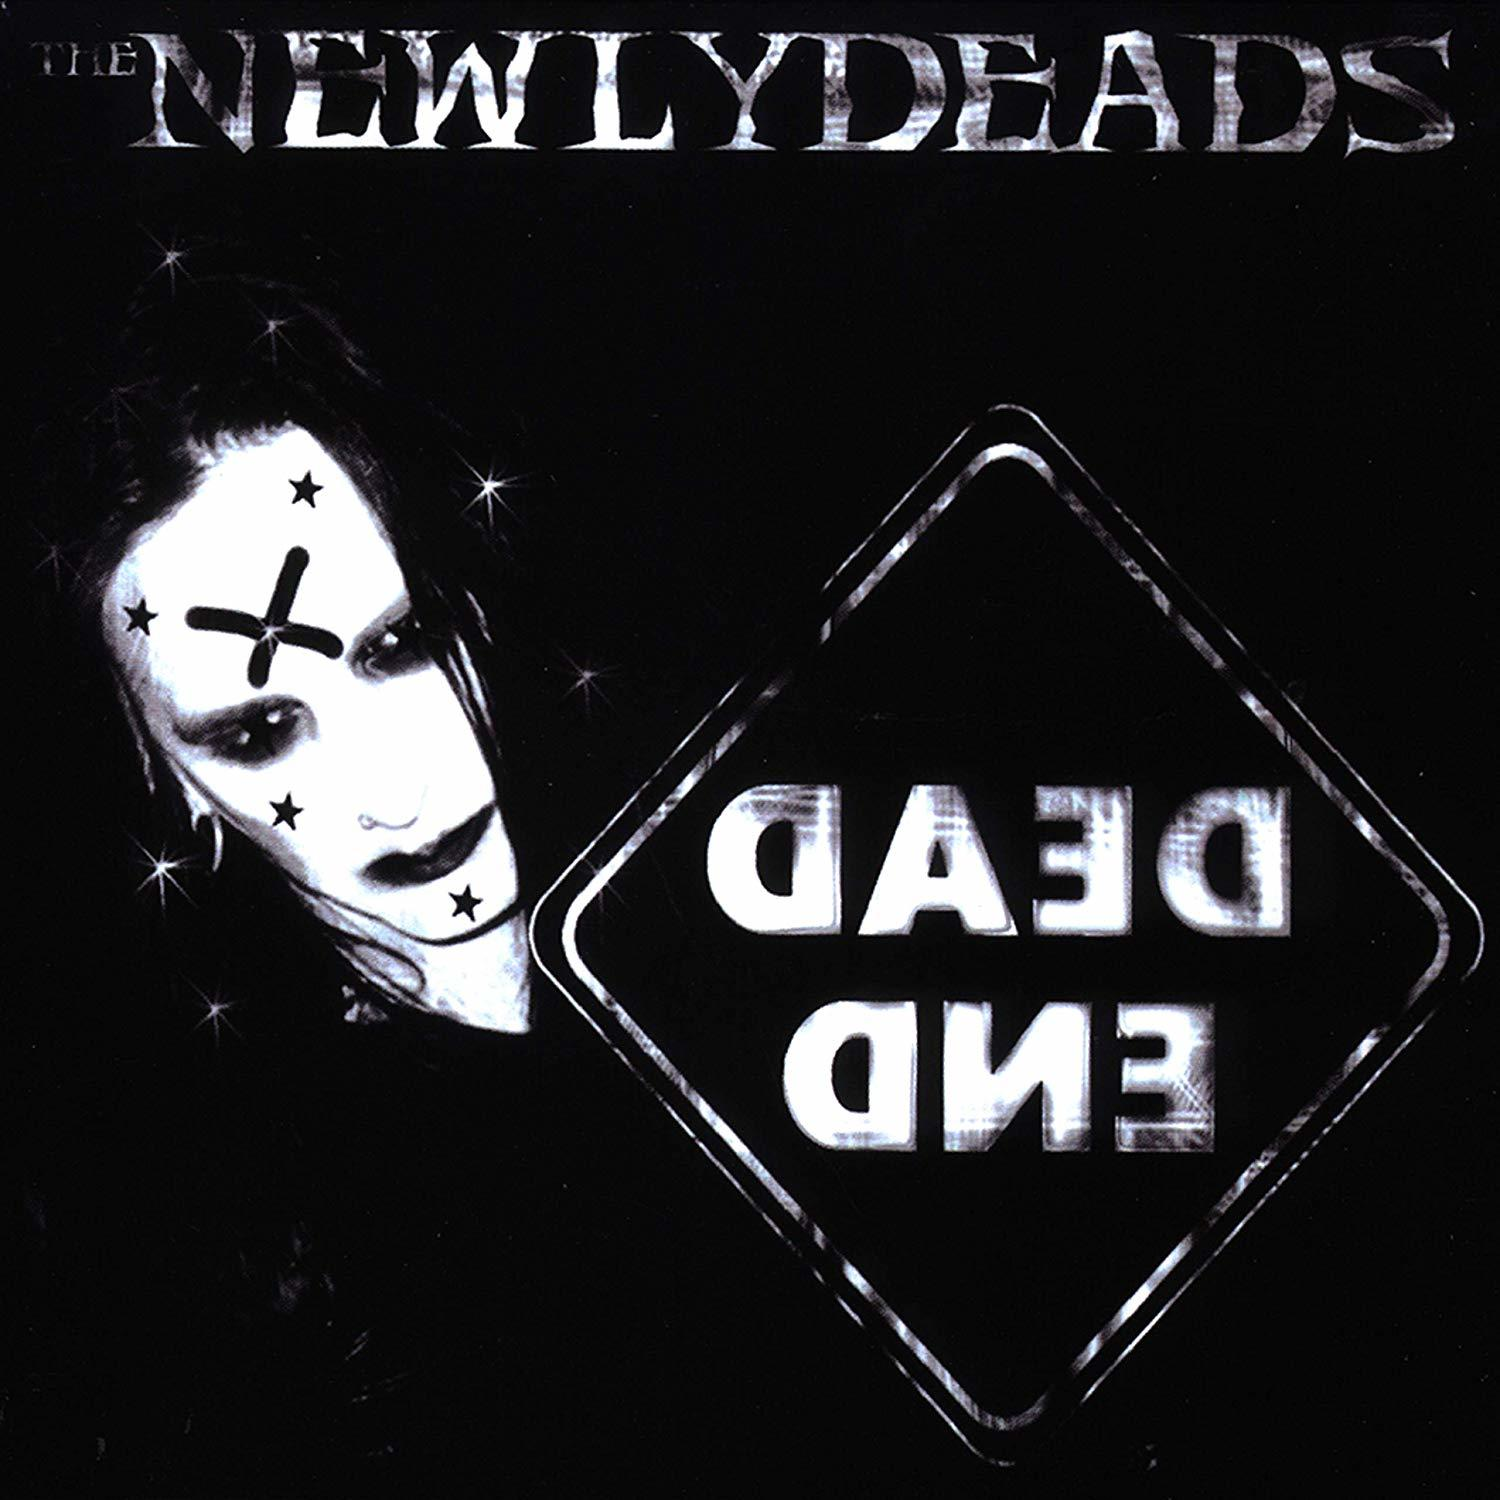 DEAD (Vinyl) The Newlydeads - - END